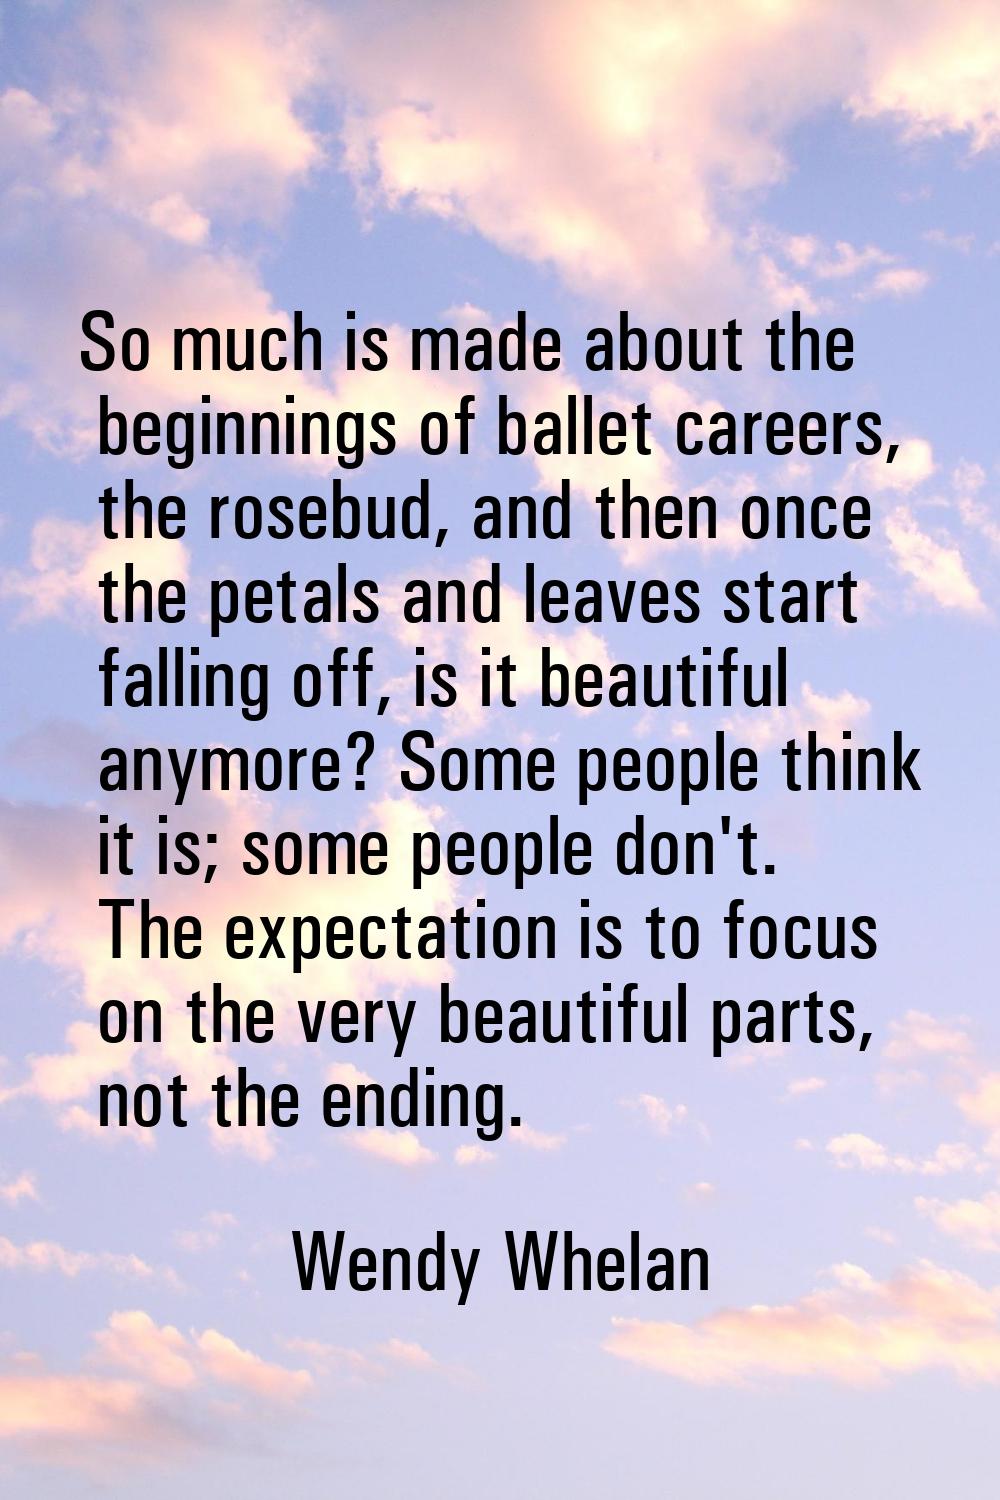 So much is made about the beginnings of ballet careers, the rosebud, and then once the petals and l